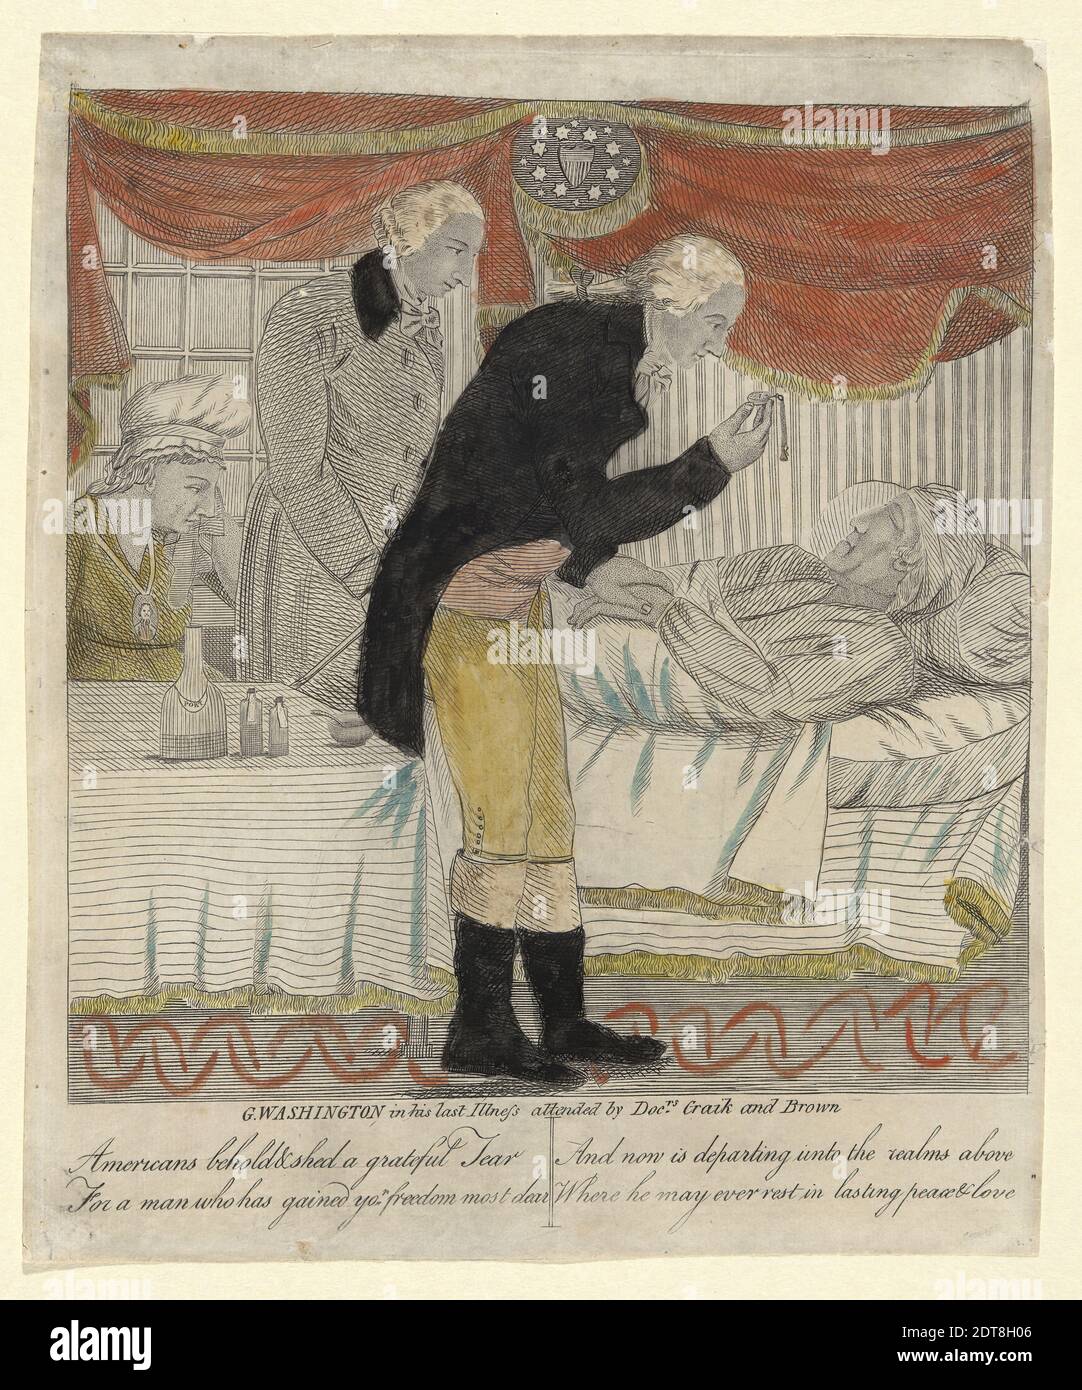 Artist: Amos Doolittle, American, 1754–1832, G. Washington in his last Illness attended by Doctors Craik and Brown, Hand colored etching, sheet: 30.5 × 25.4 cm (12 × 10 in.), Made in United States, American, 19th century, Works on Paper - Prints Stock Photo